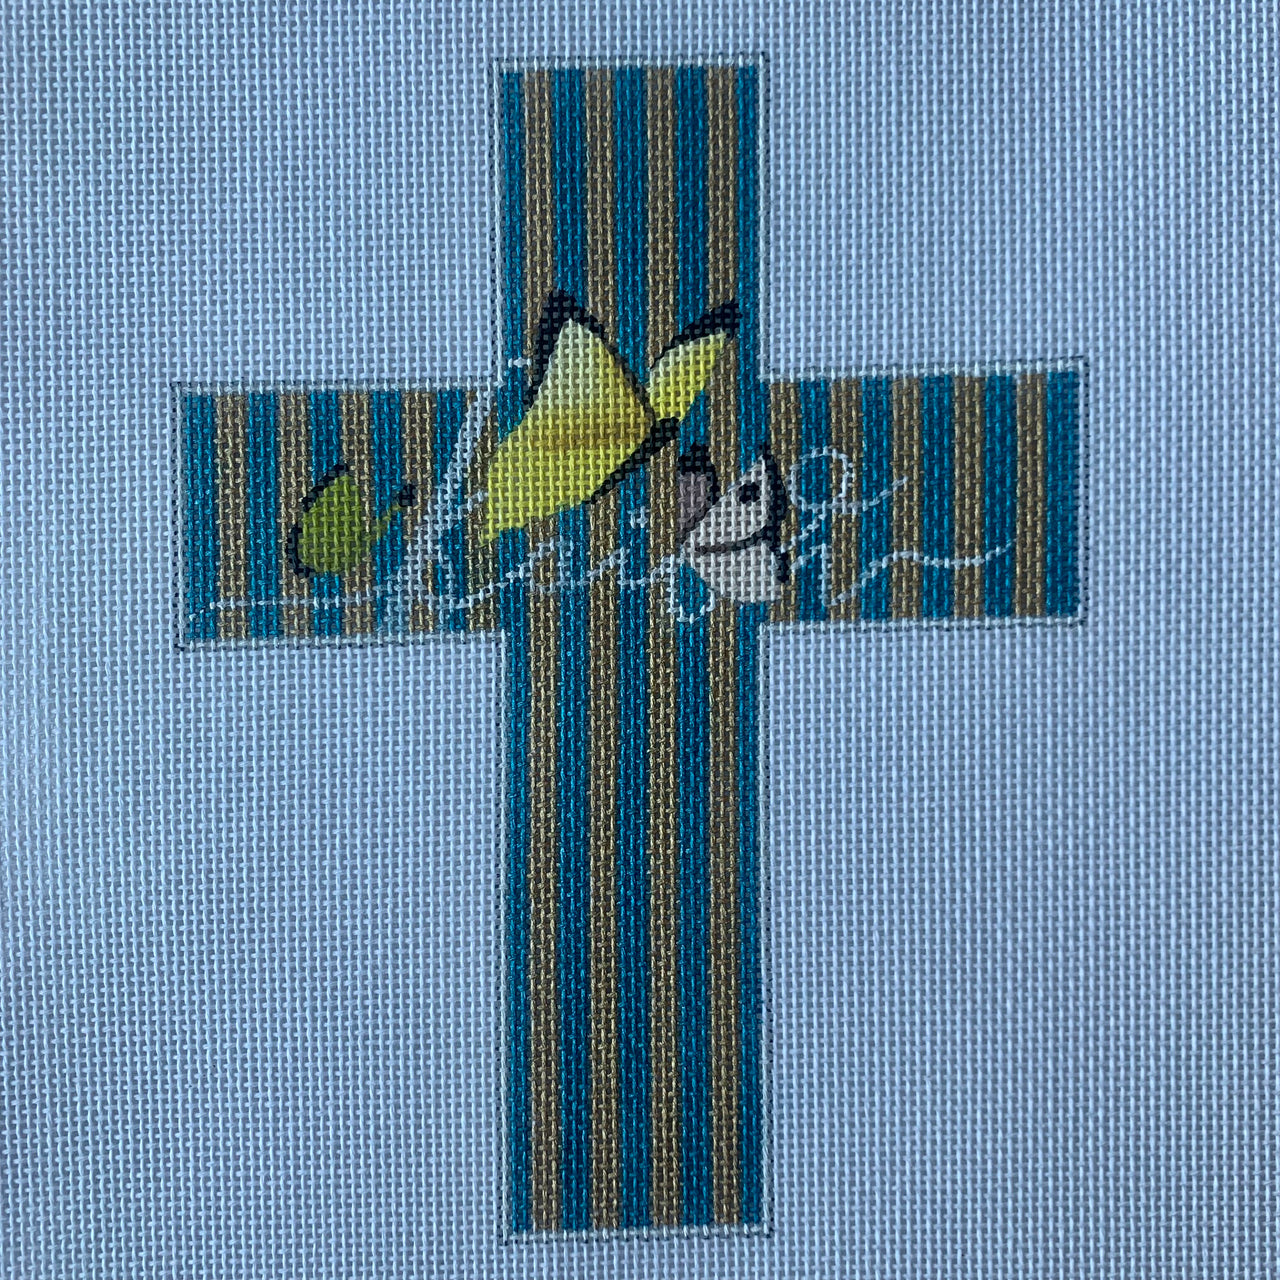 IF267 Faith with Butterfly Cross